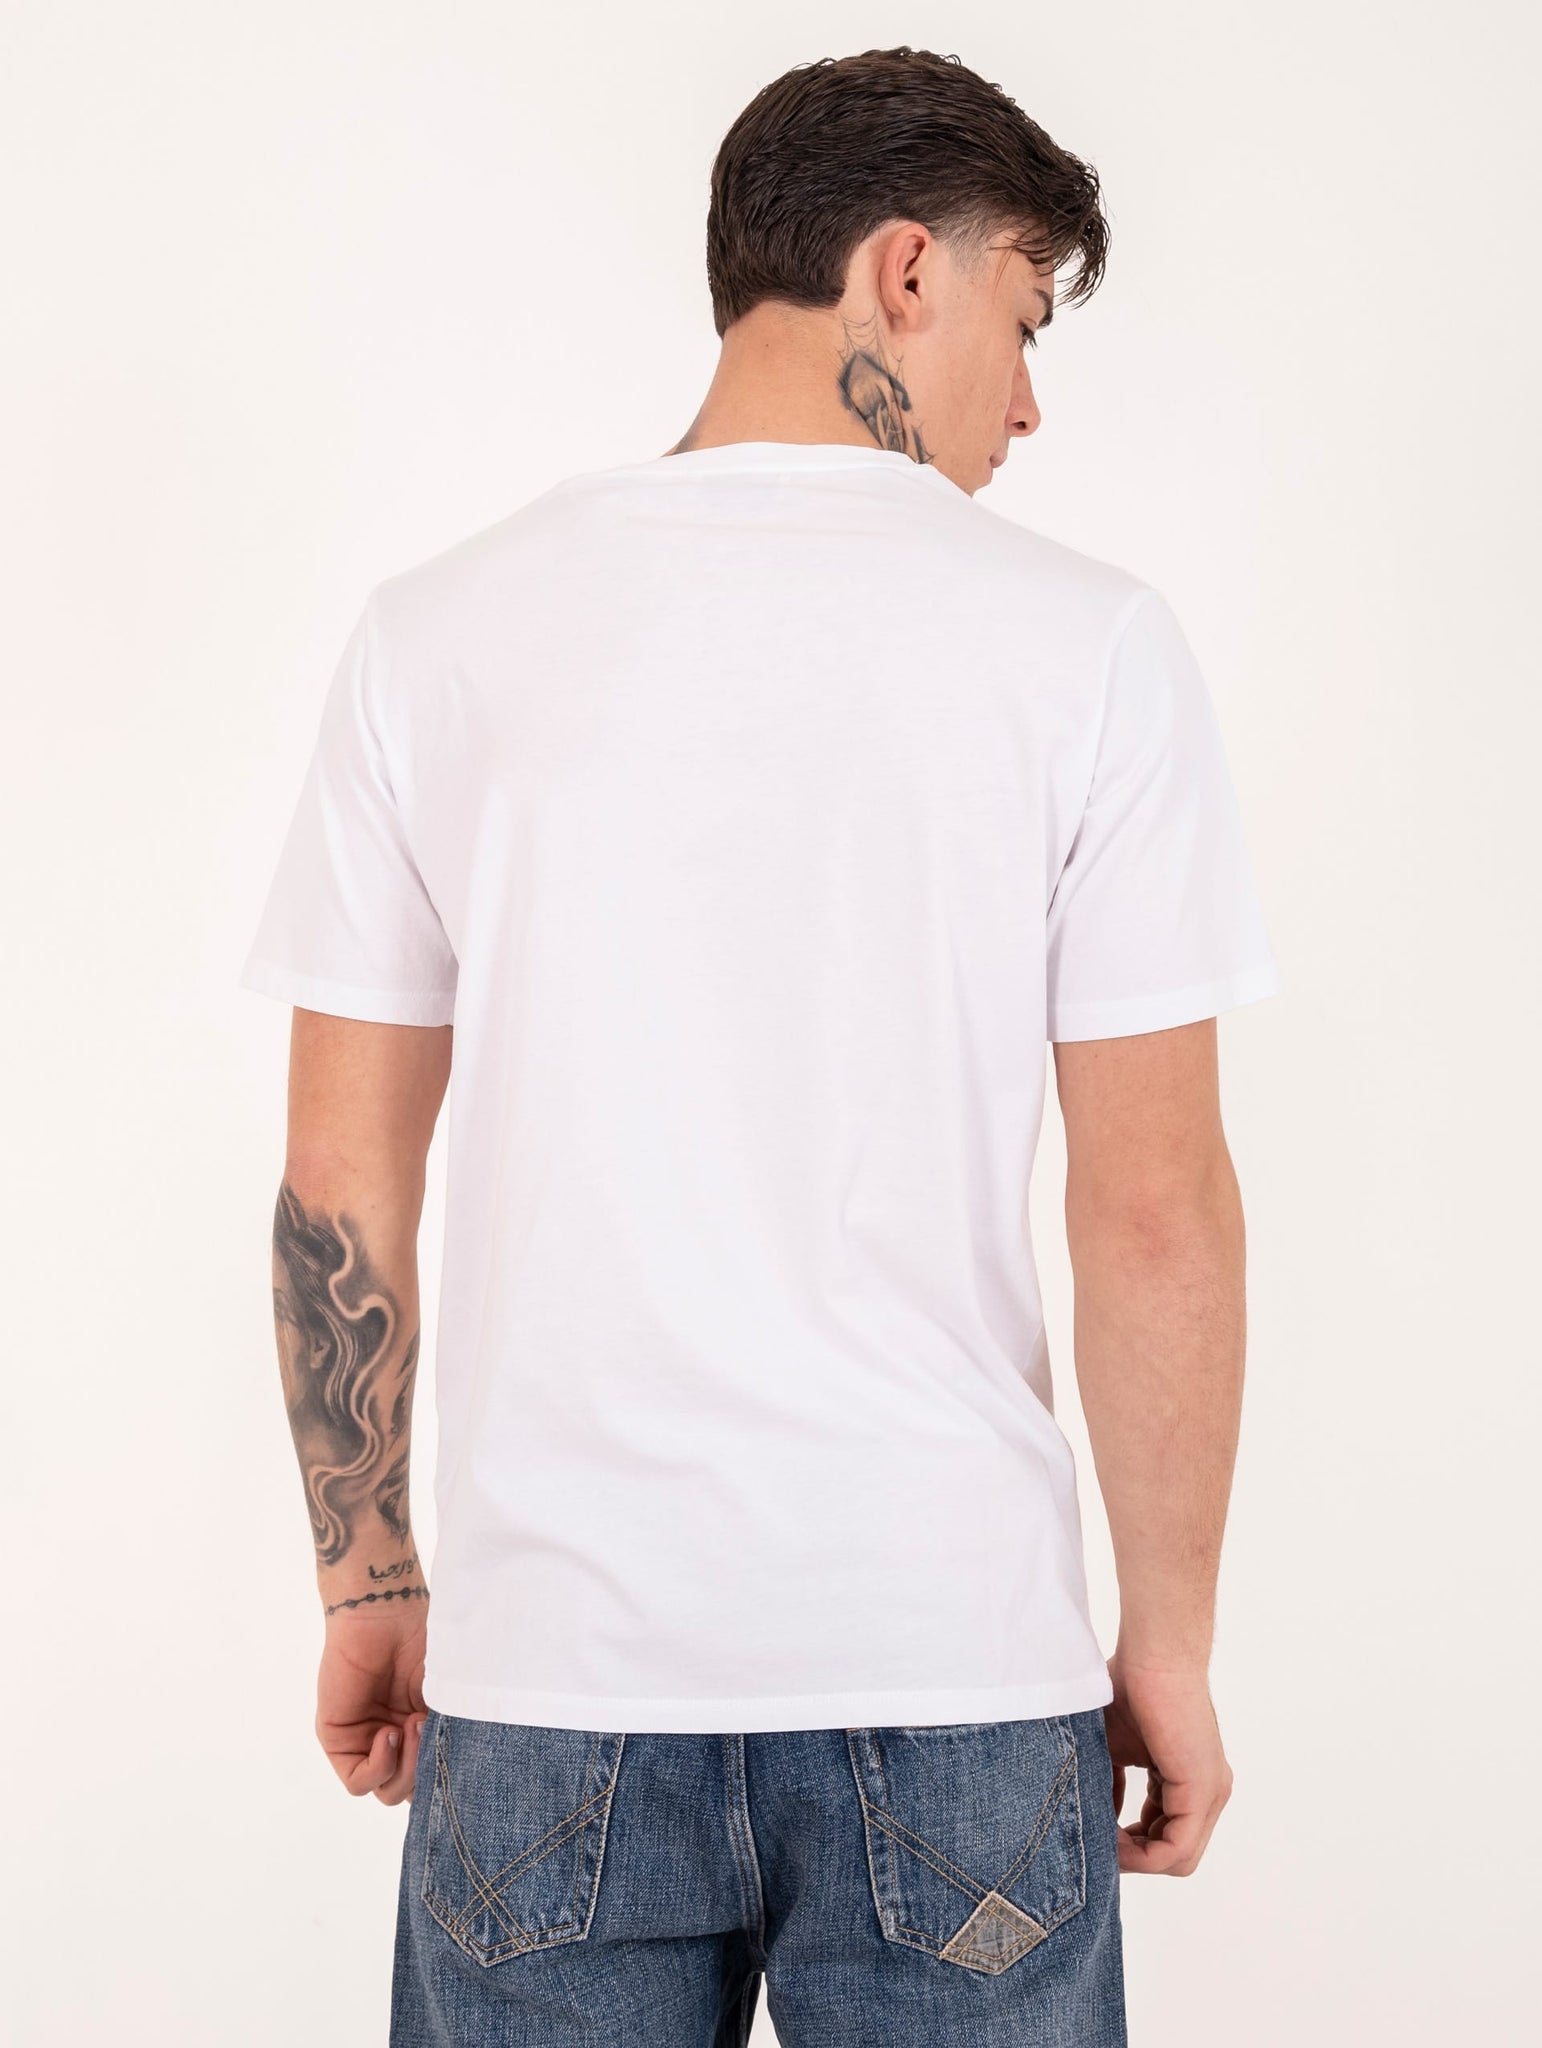 T-Shirt Roy Roger's in Cotone Bianca con Stampa Nera